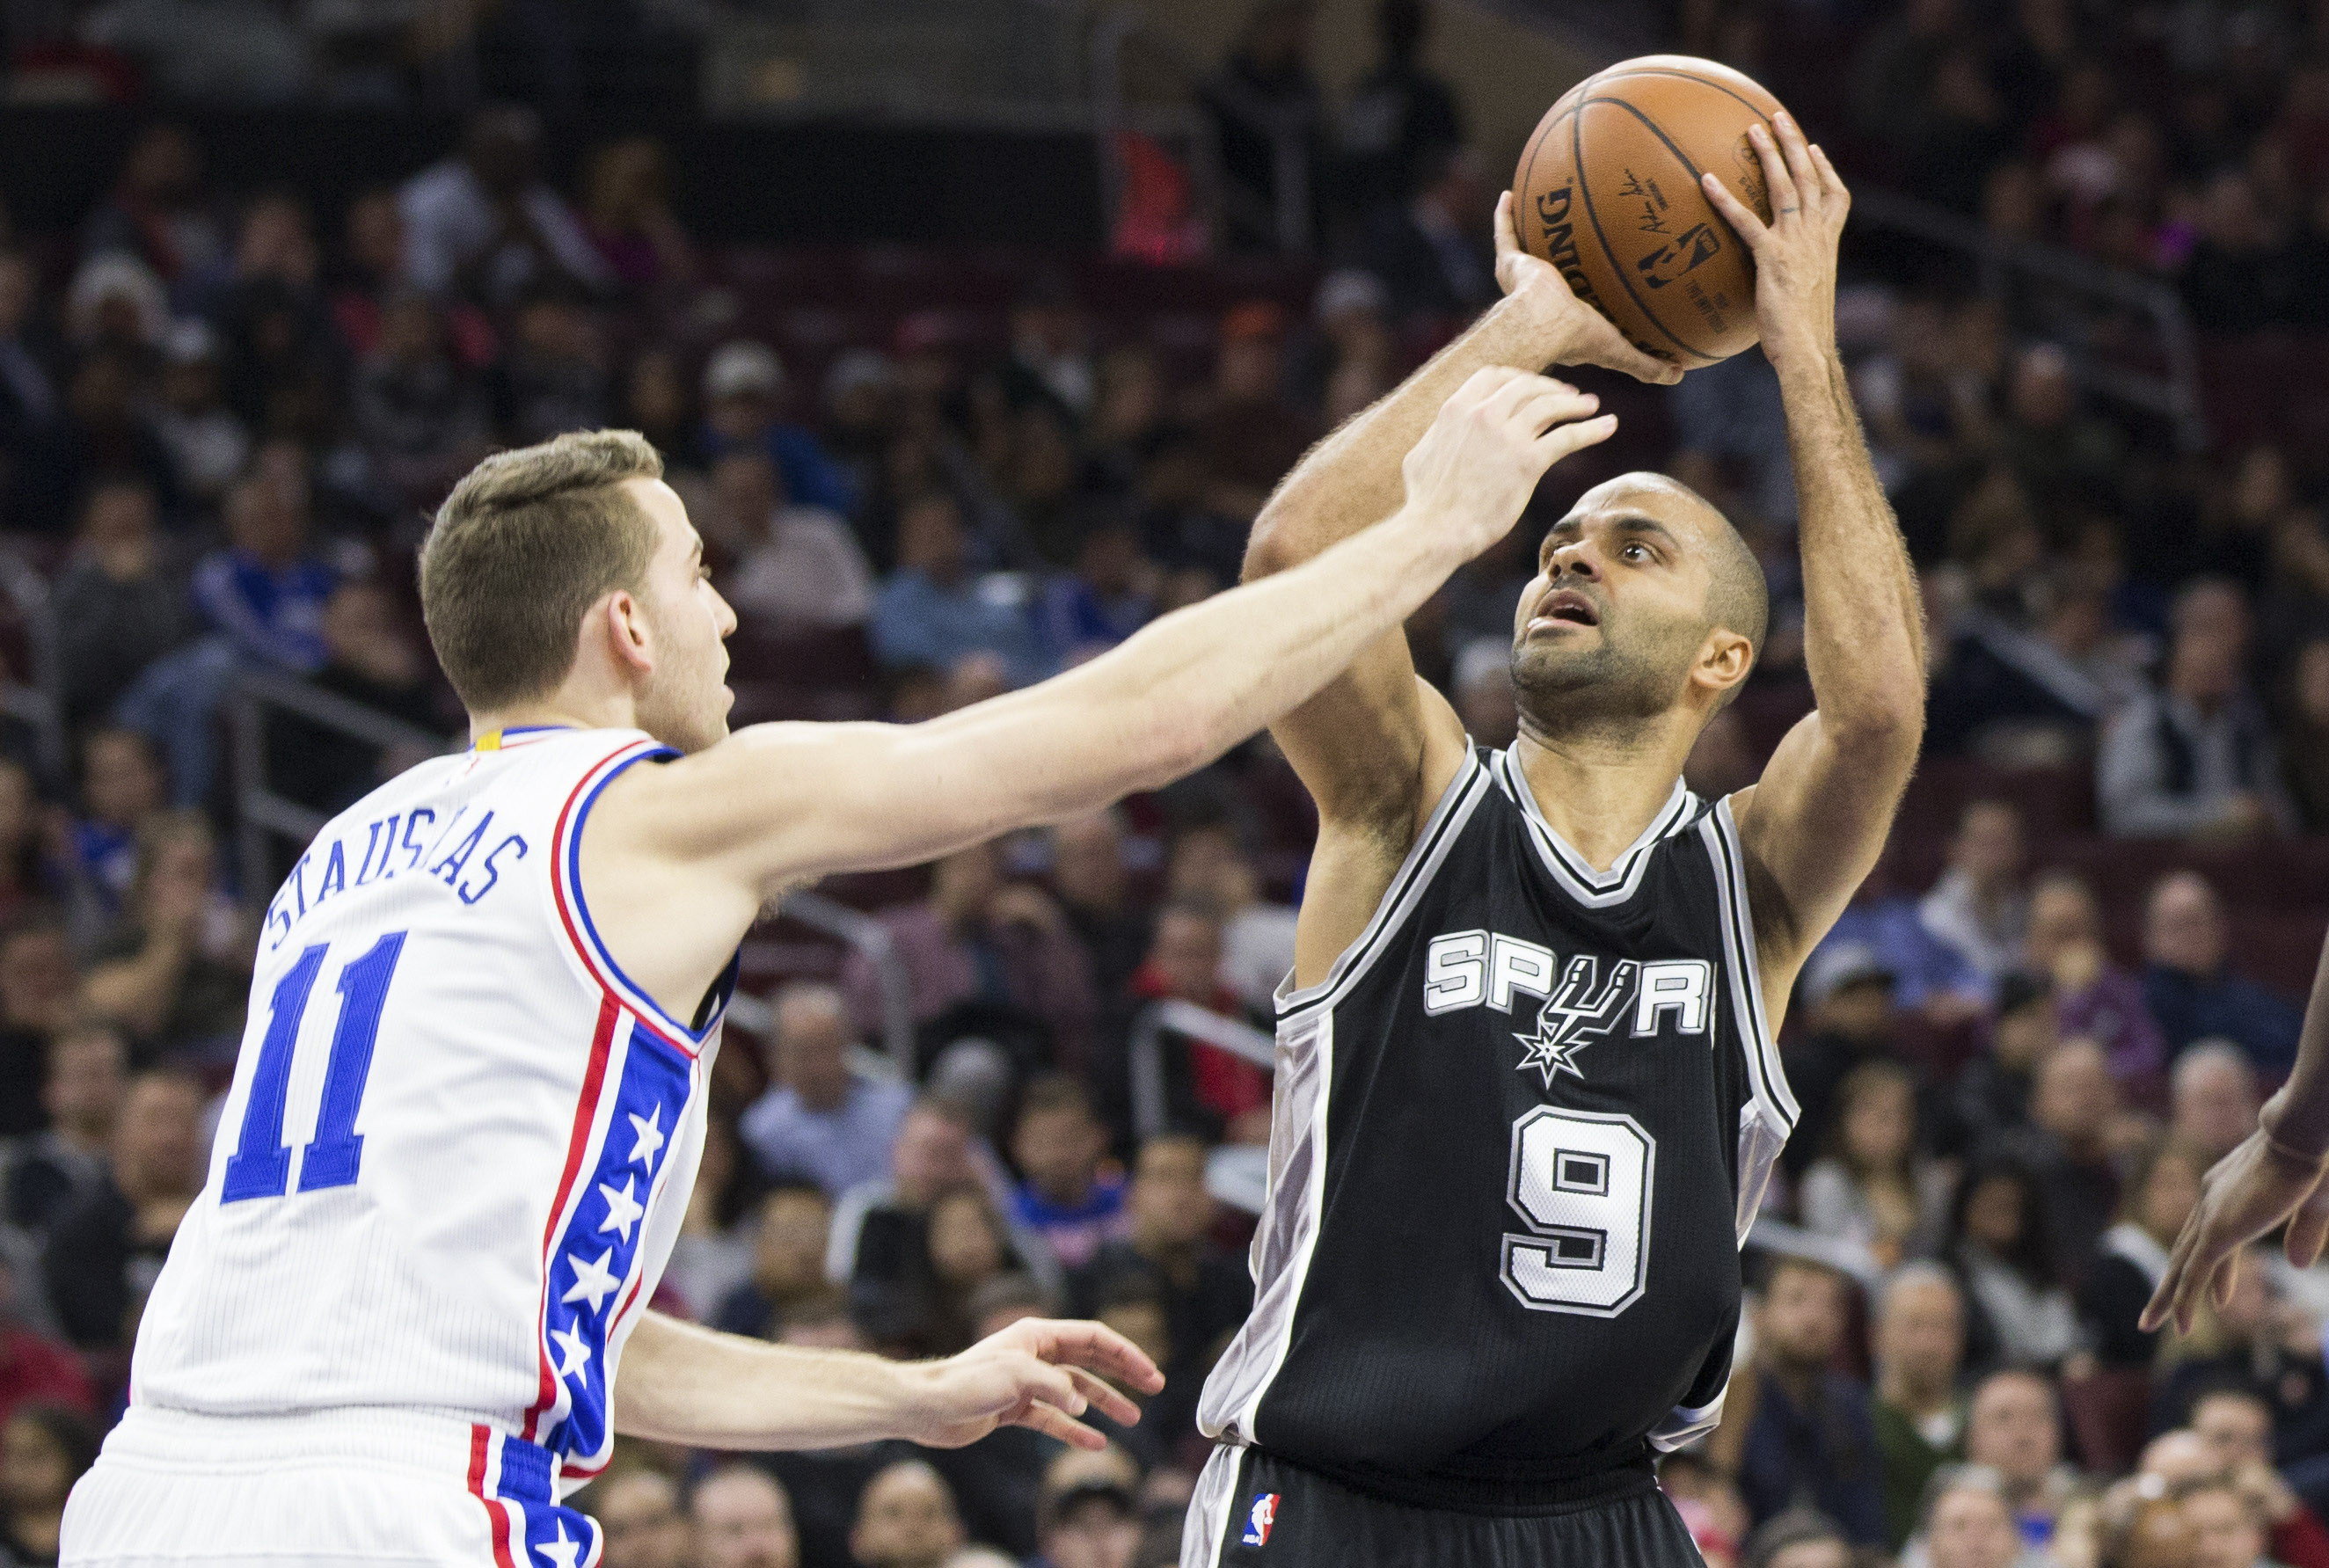 76ers at Spurs live stream: How to watch online - FanSided